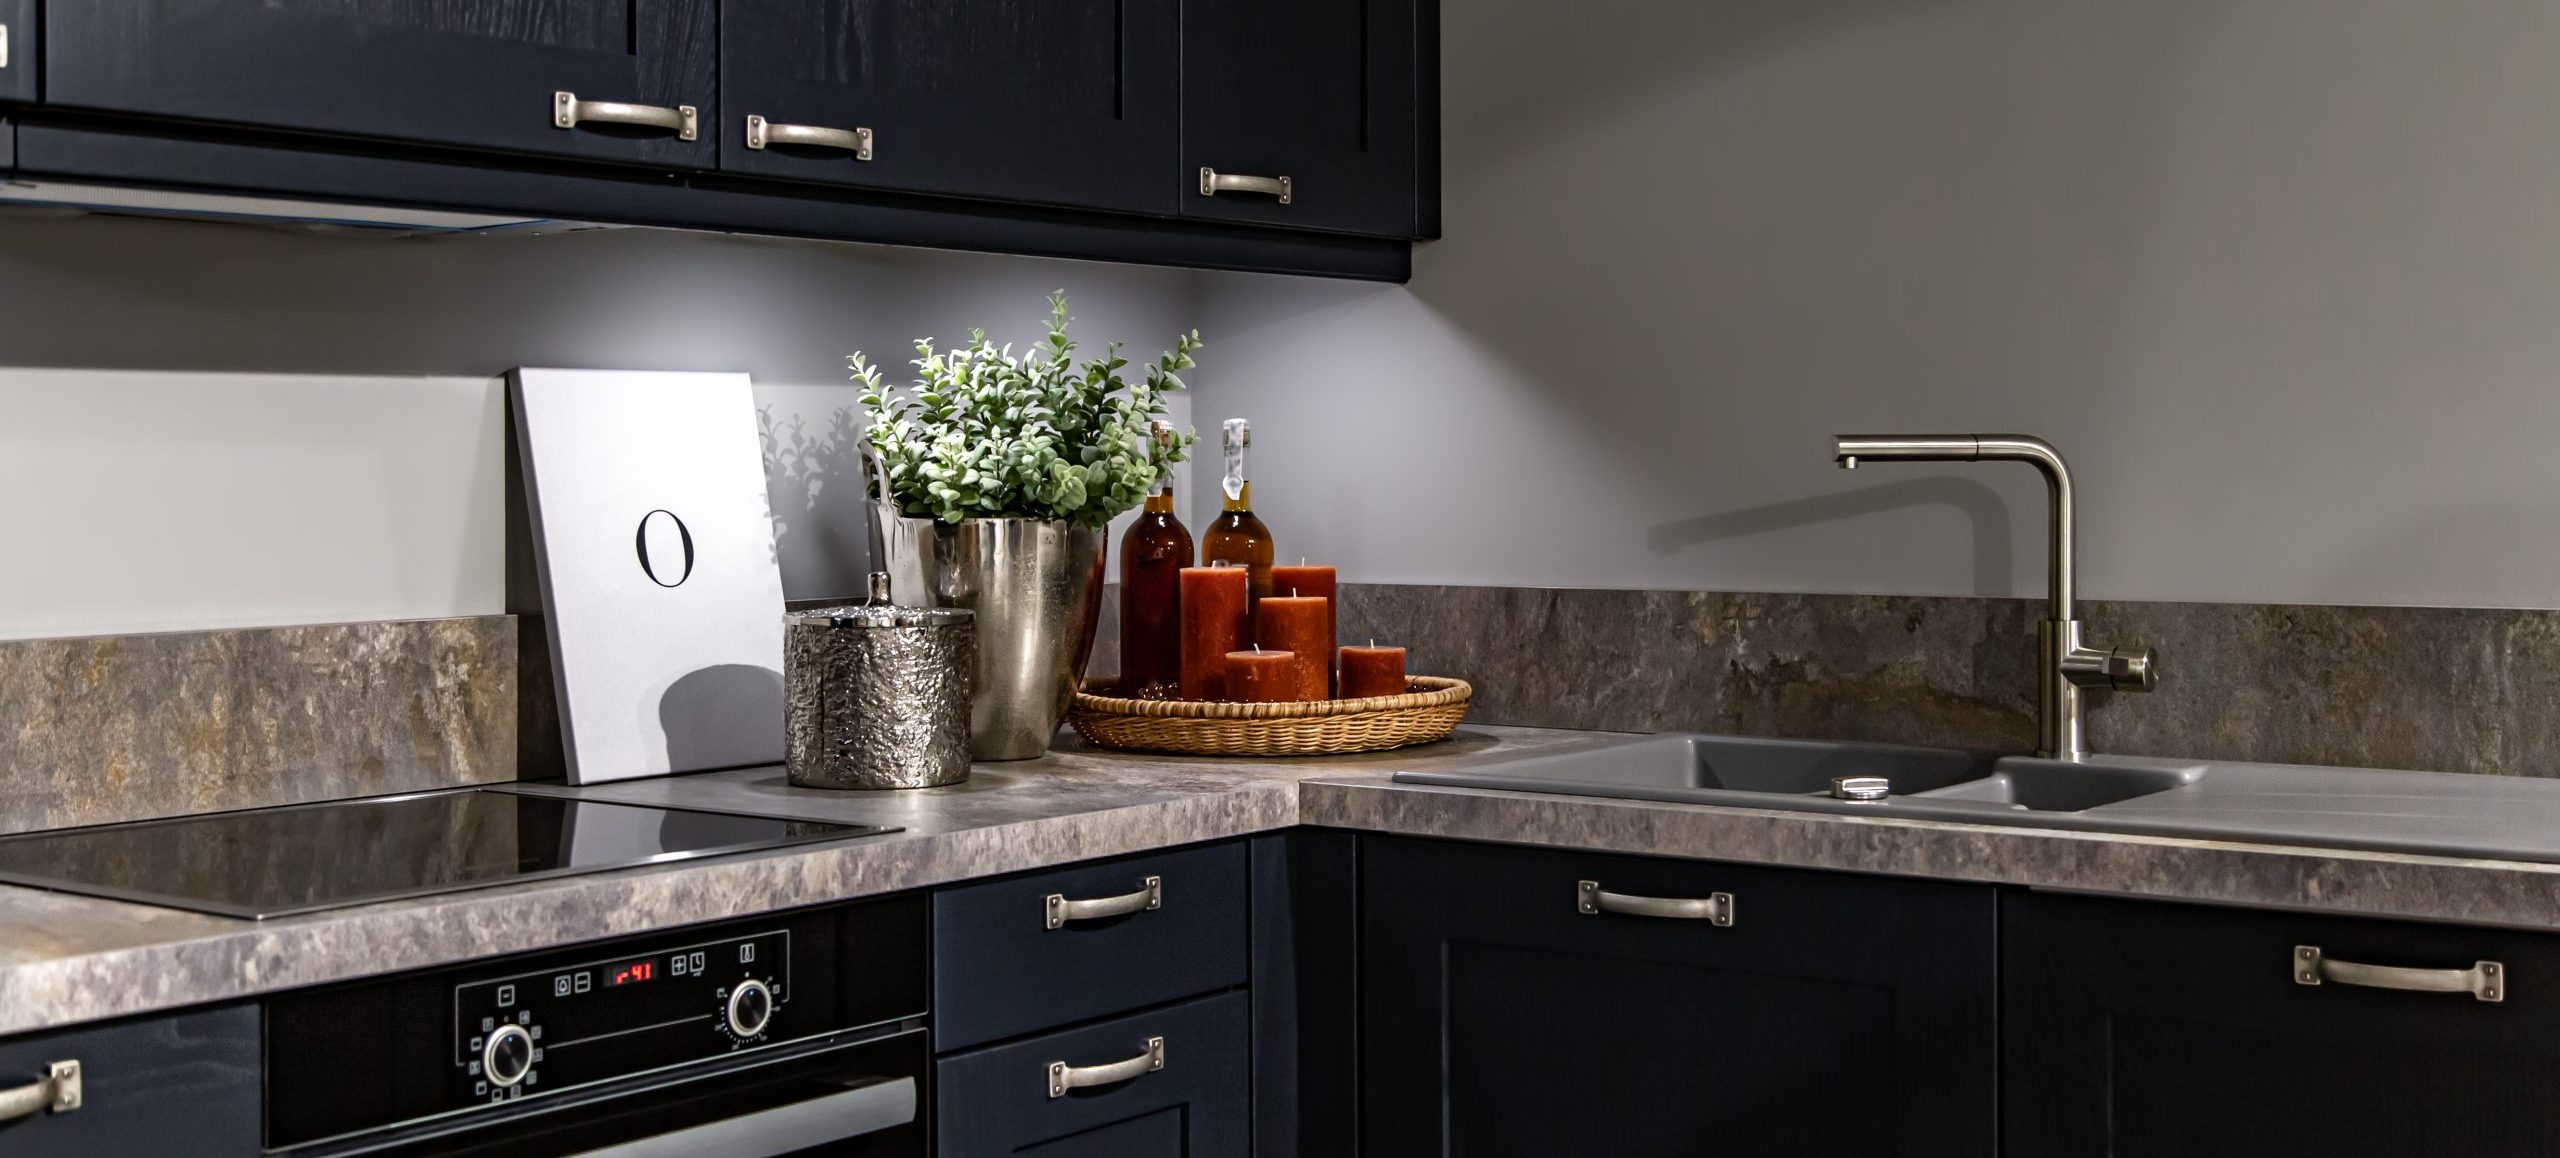 Dark kitchen cabinets with metal pulls or knobs in home interior.